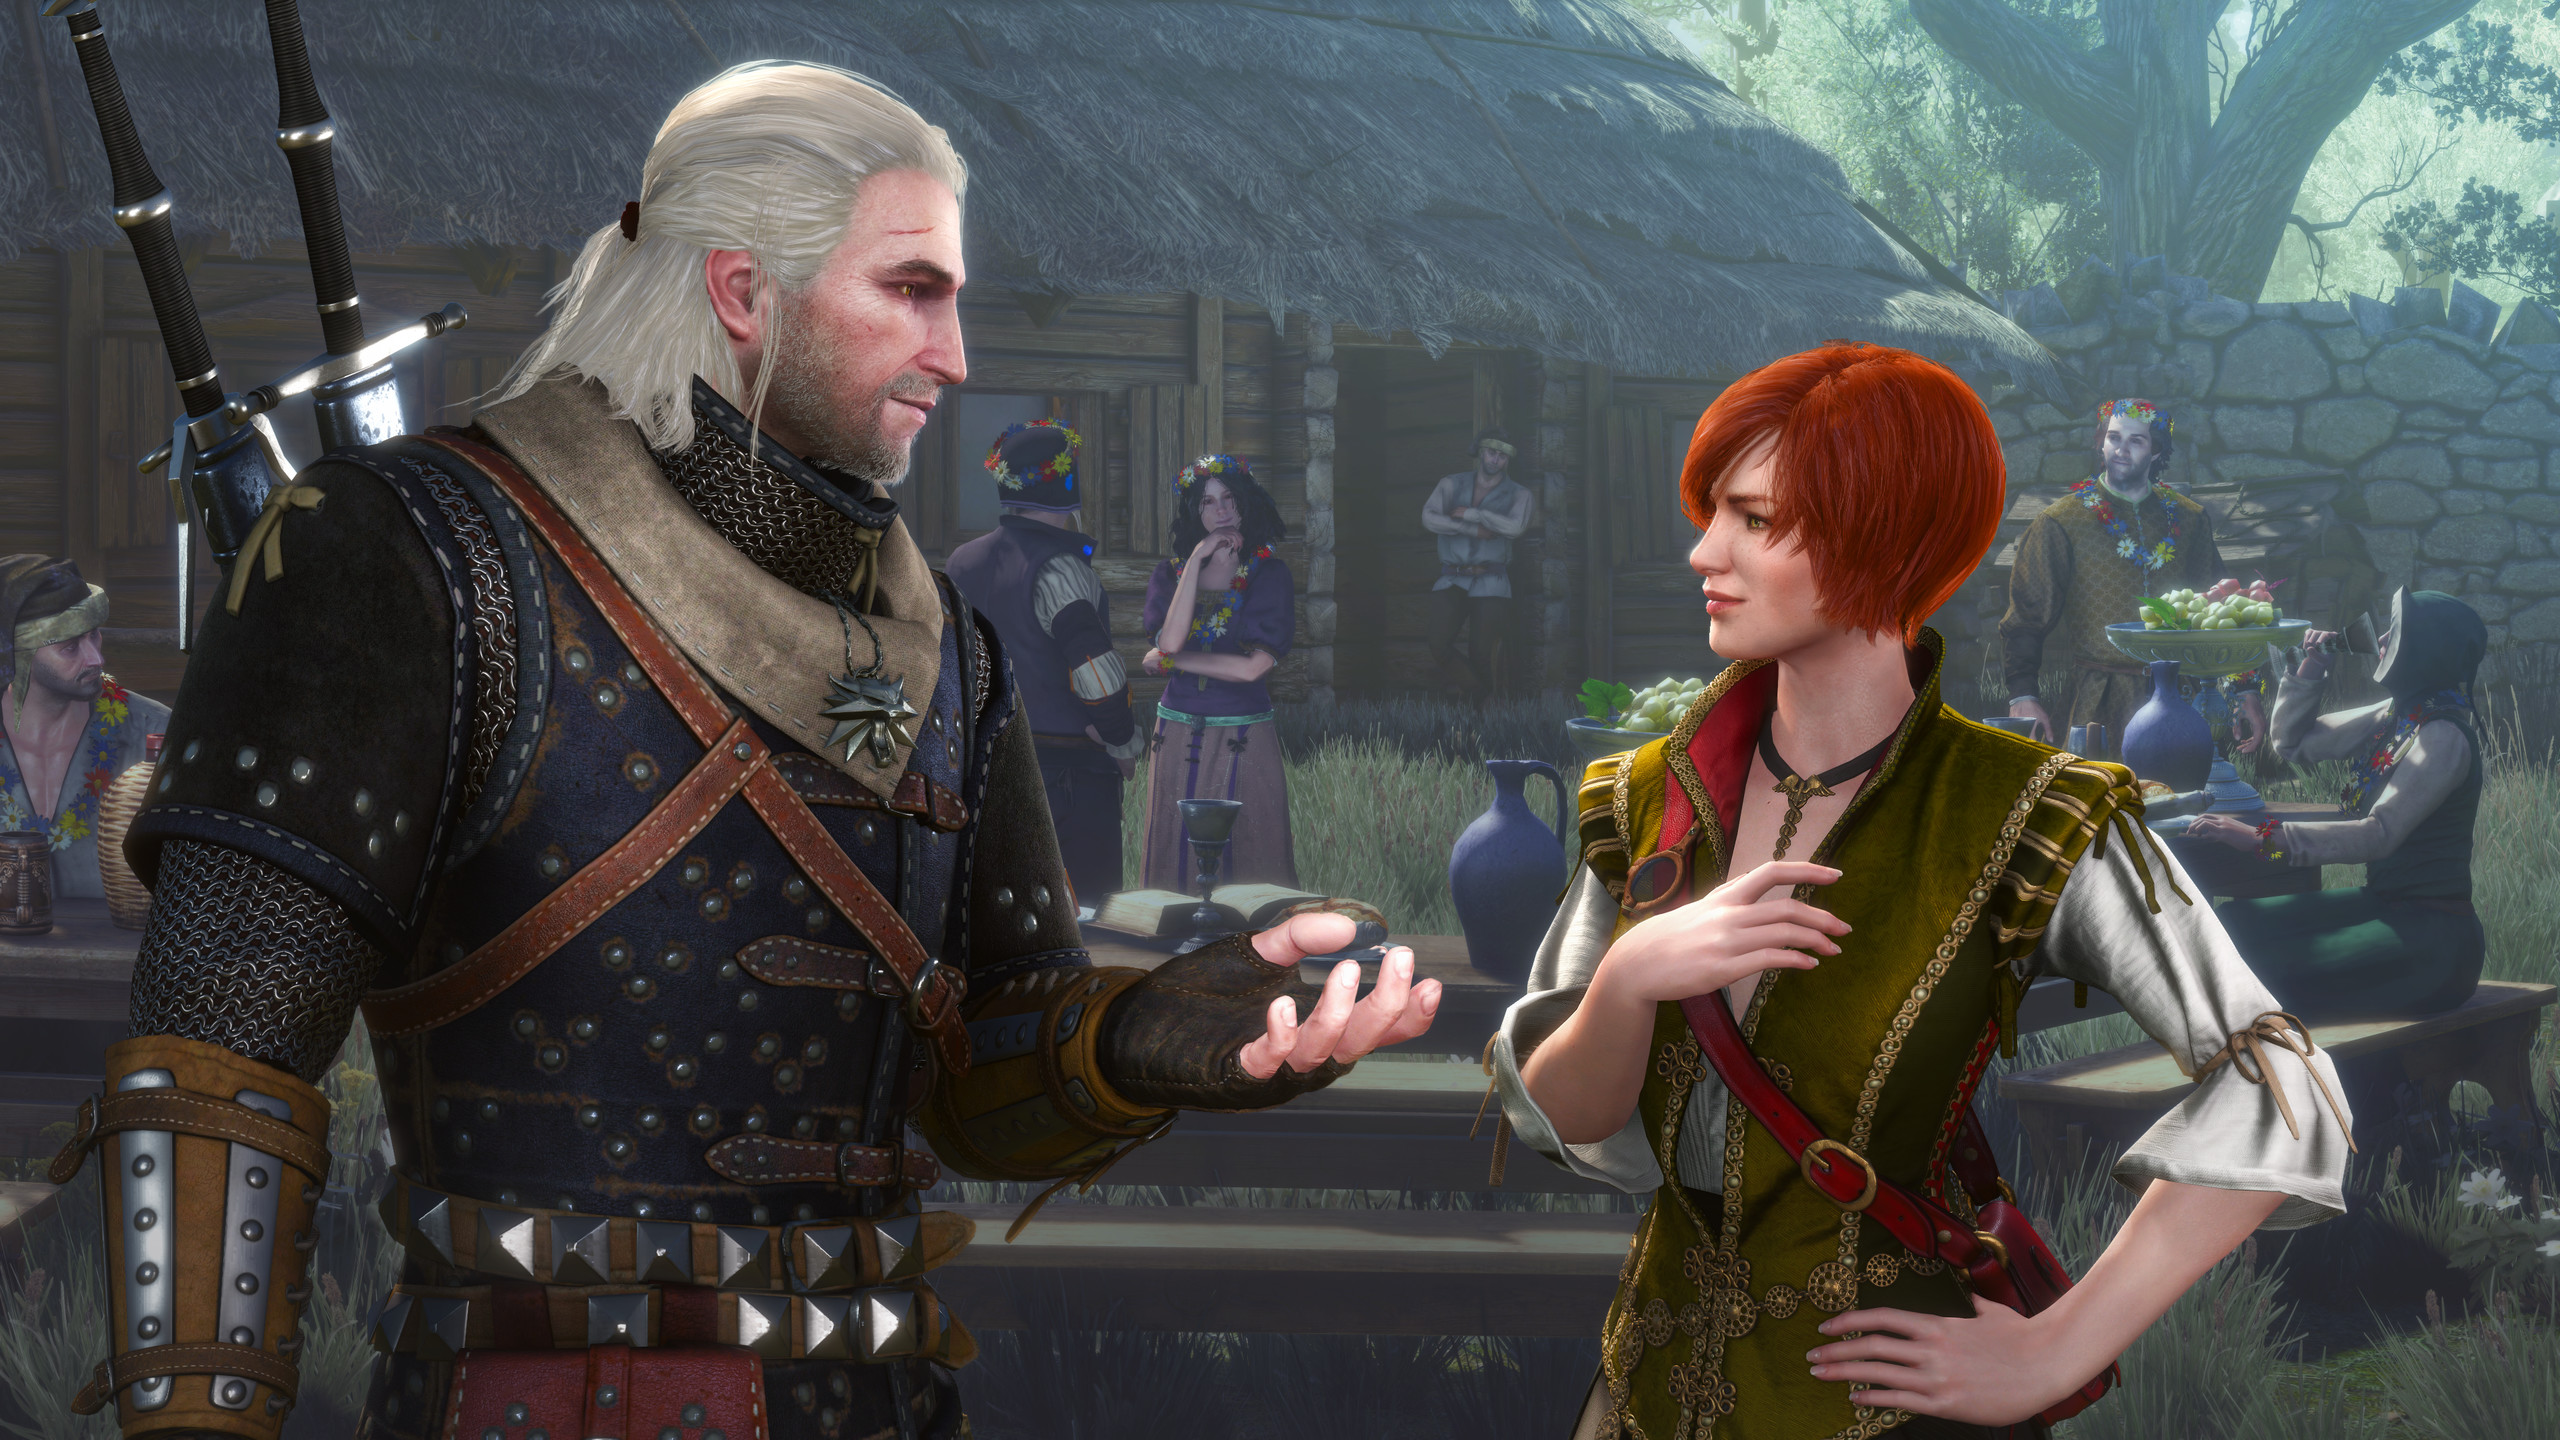 2560x1440 General  The Witcher The Witcher 3: Wild Hunt Geralt of Rivia DLC  Shani video